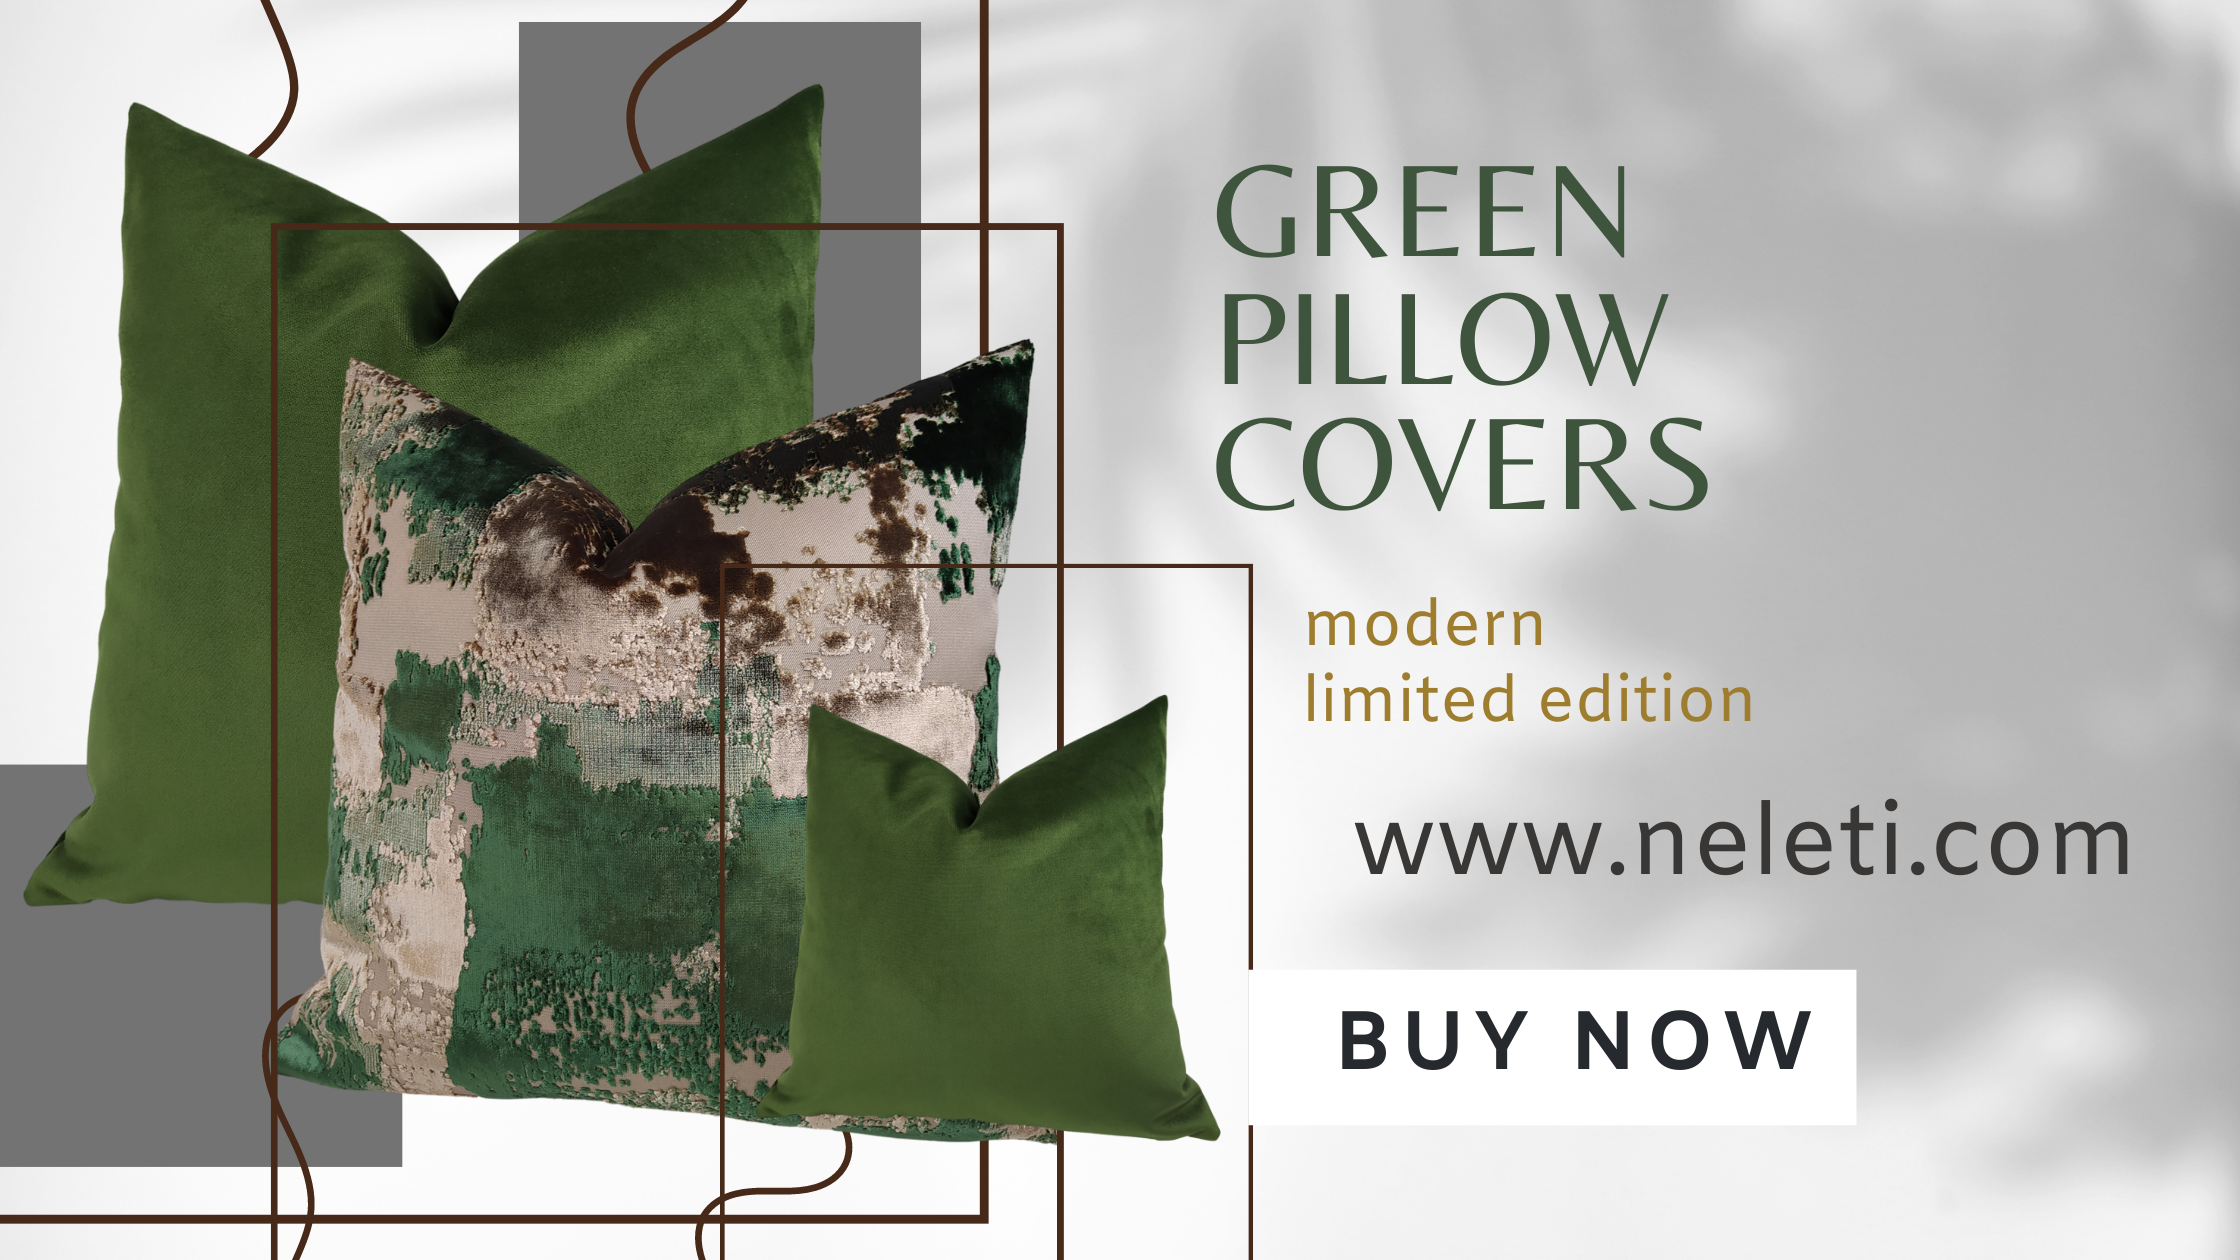 neleti.com-green-pillows-for-couch